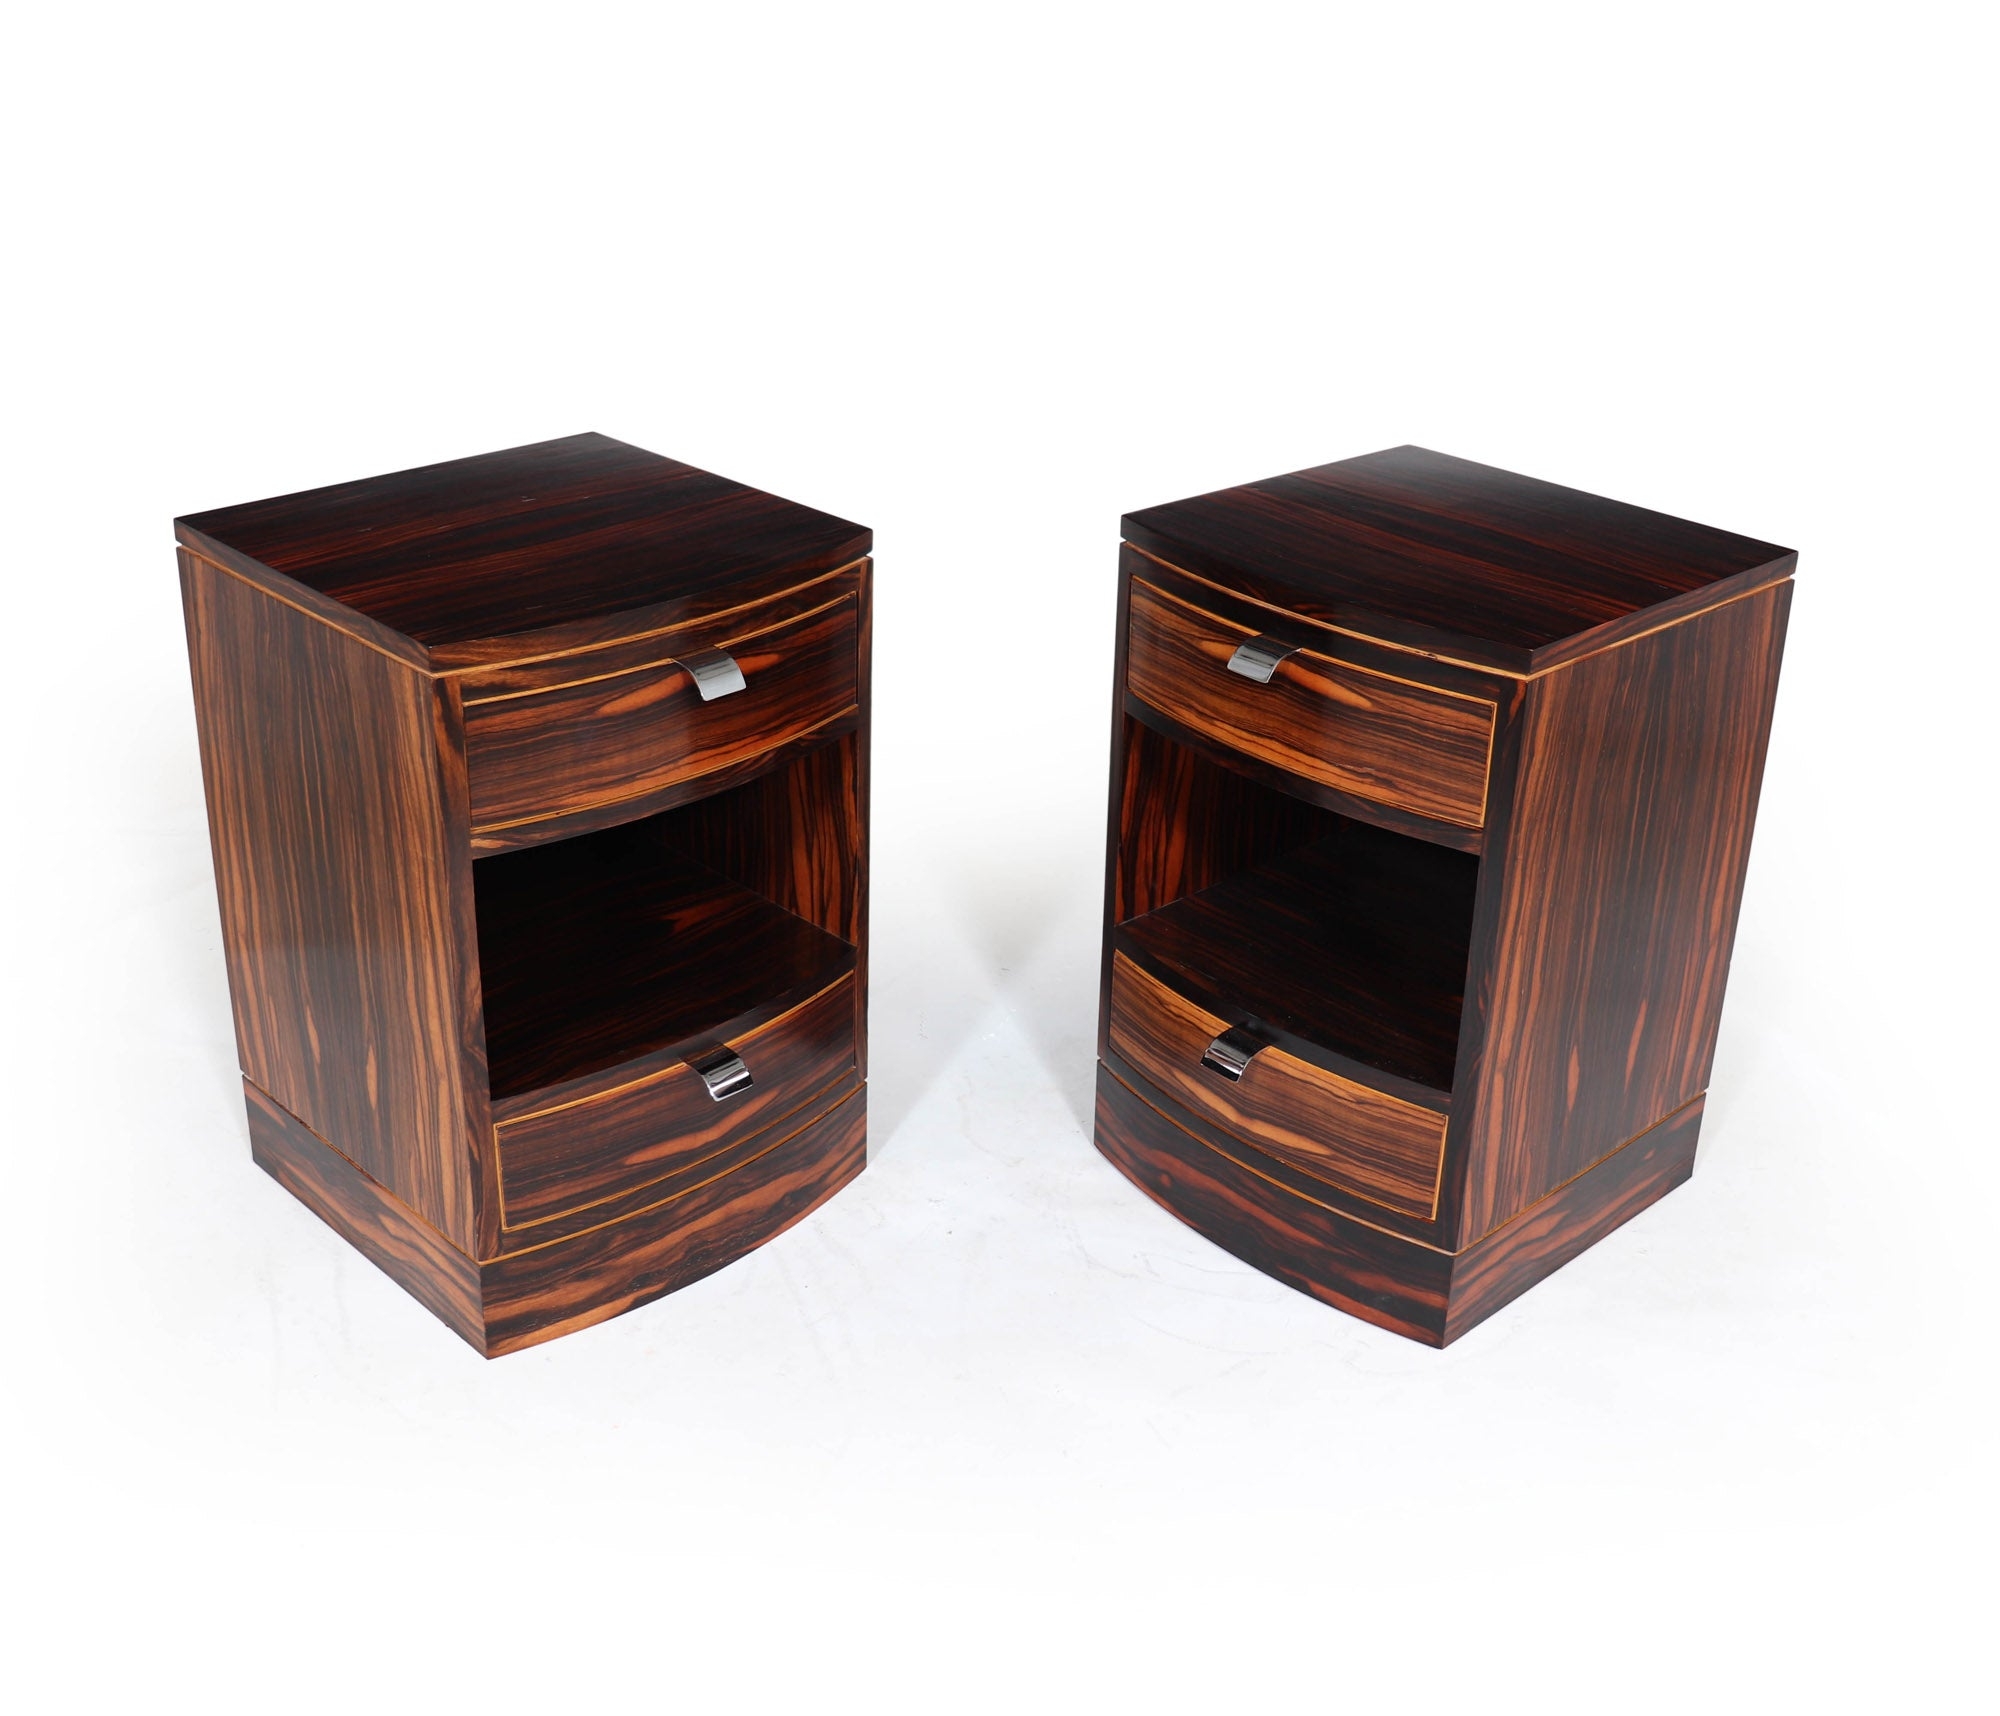 Art Deco Bedside Chests in Macassar Ebony – The Furniture Rooms